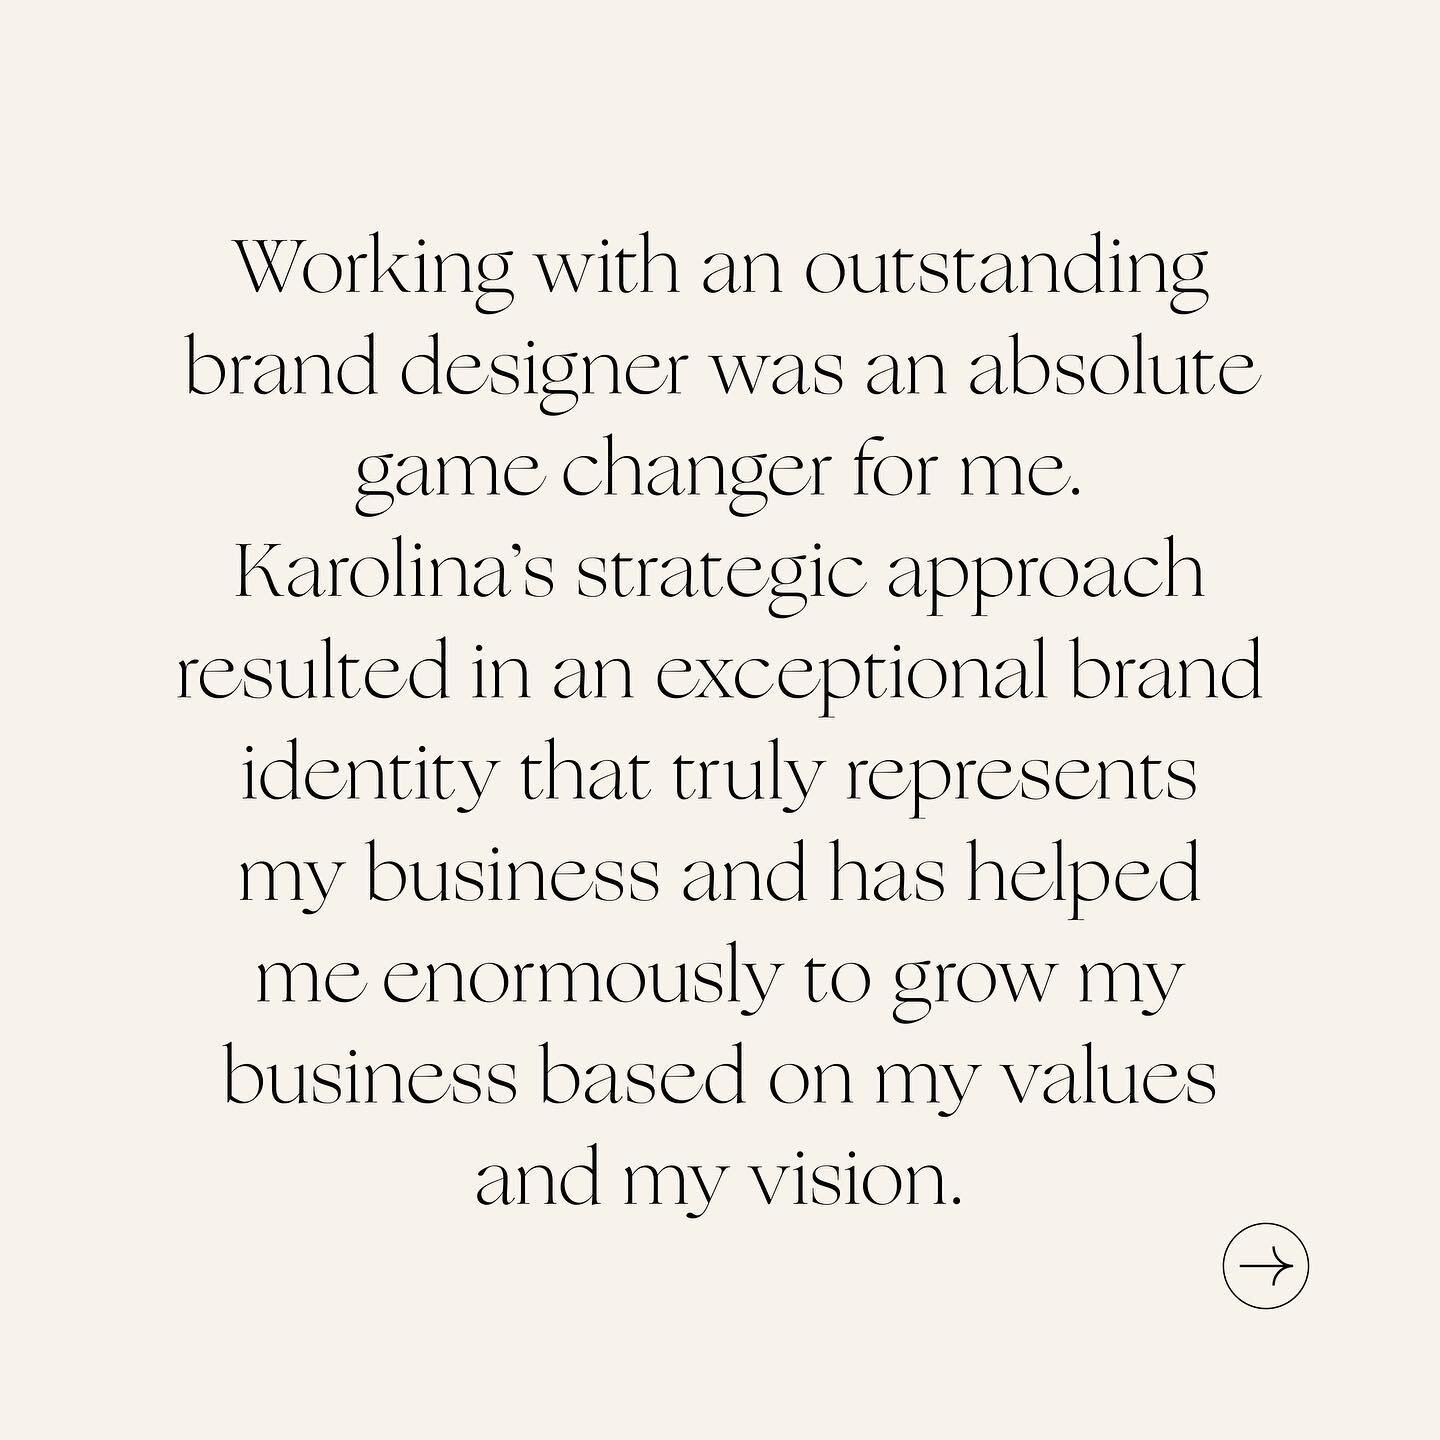 Lovely words from Marlies Krups from @hercircle.au 💕
	
&lsquo;Working with an outstanding brand designer was an absolute game changer for me. Karolina&rsquo;s strategic approach resulted in an exceptional brand identity that truly represents my busi